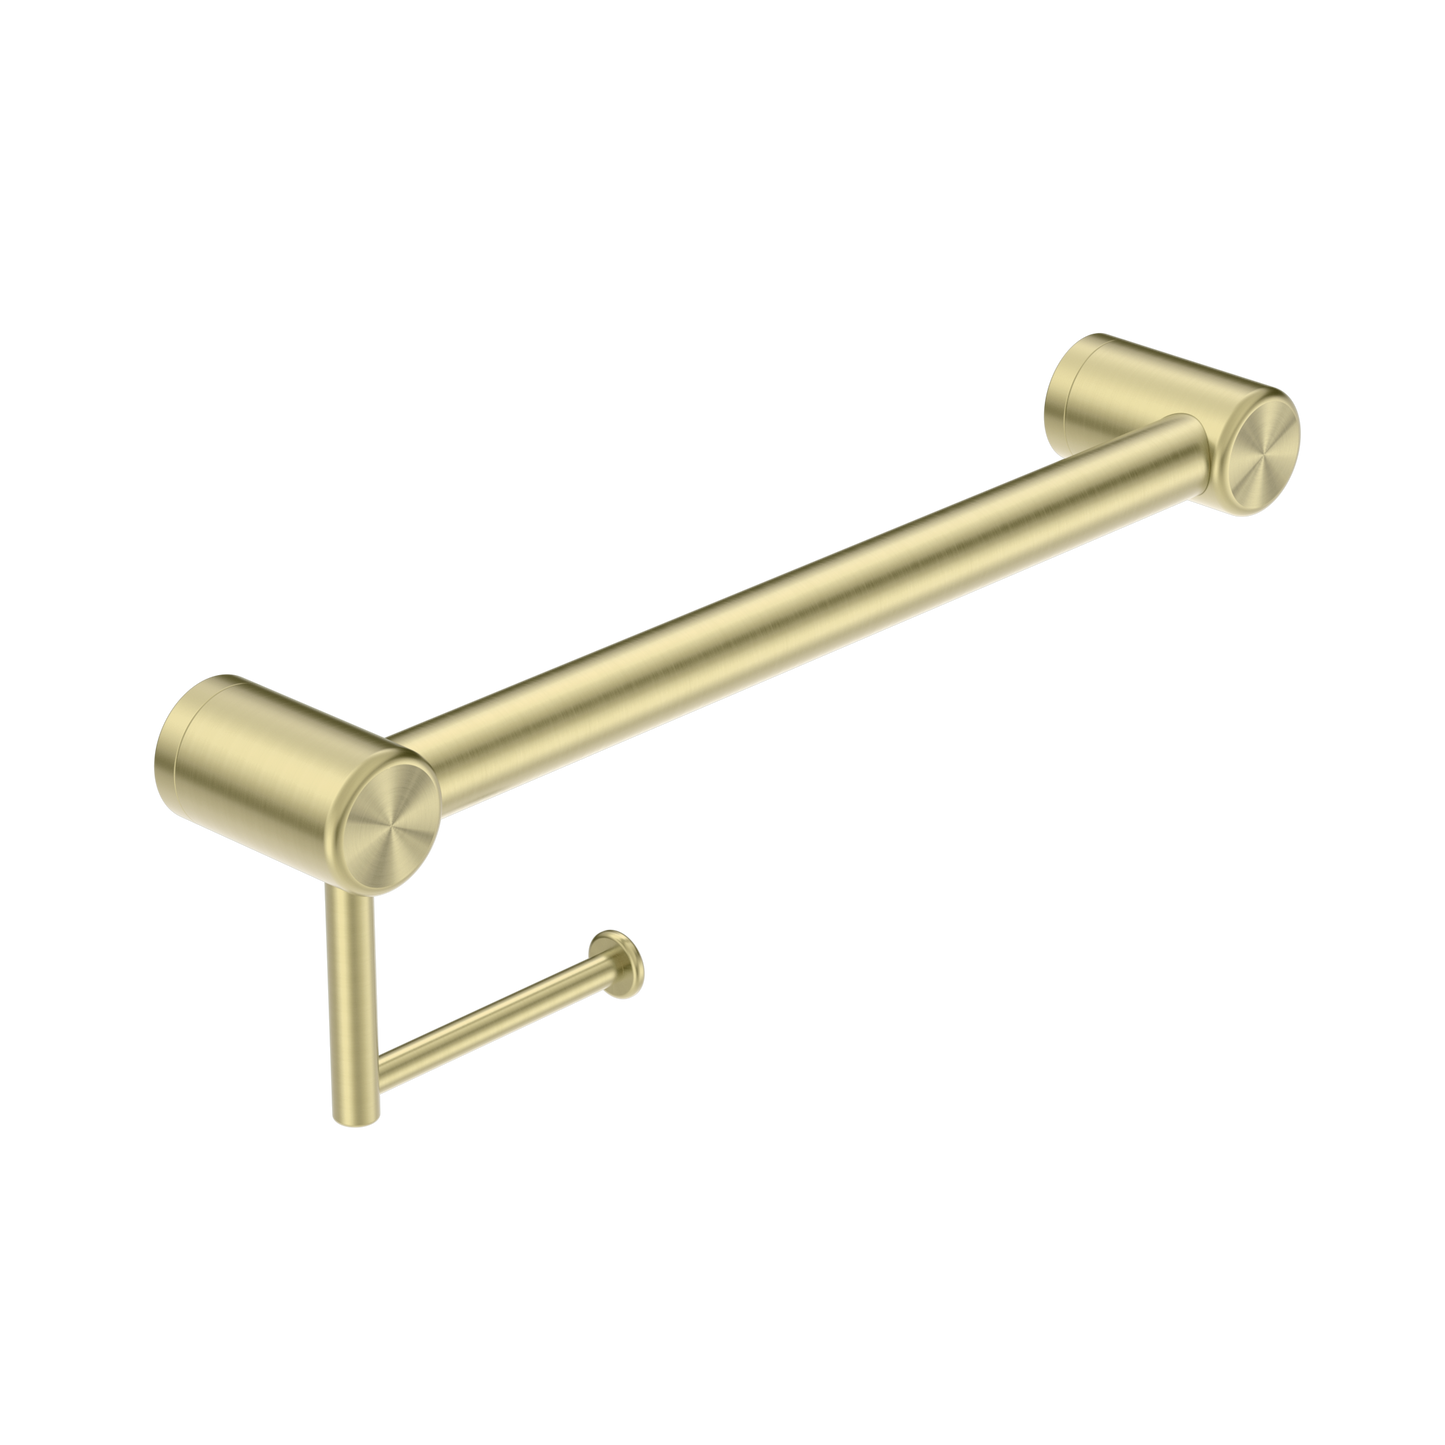 Calibre Mecca 32mm Grab Rail With Toilet Roll Holder 450mm Brushed Gold - NRCR3218ABG